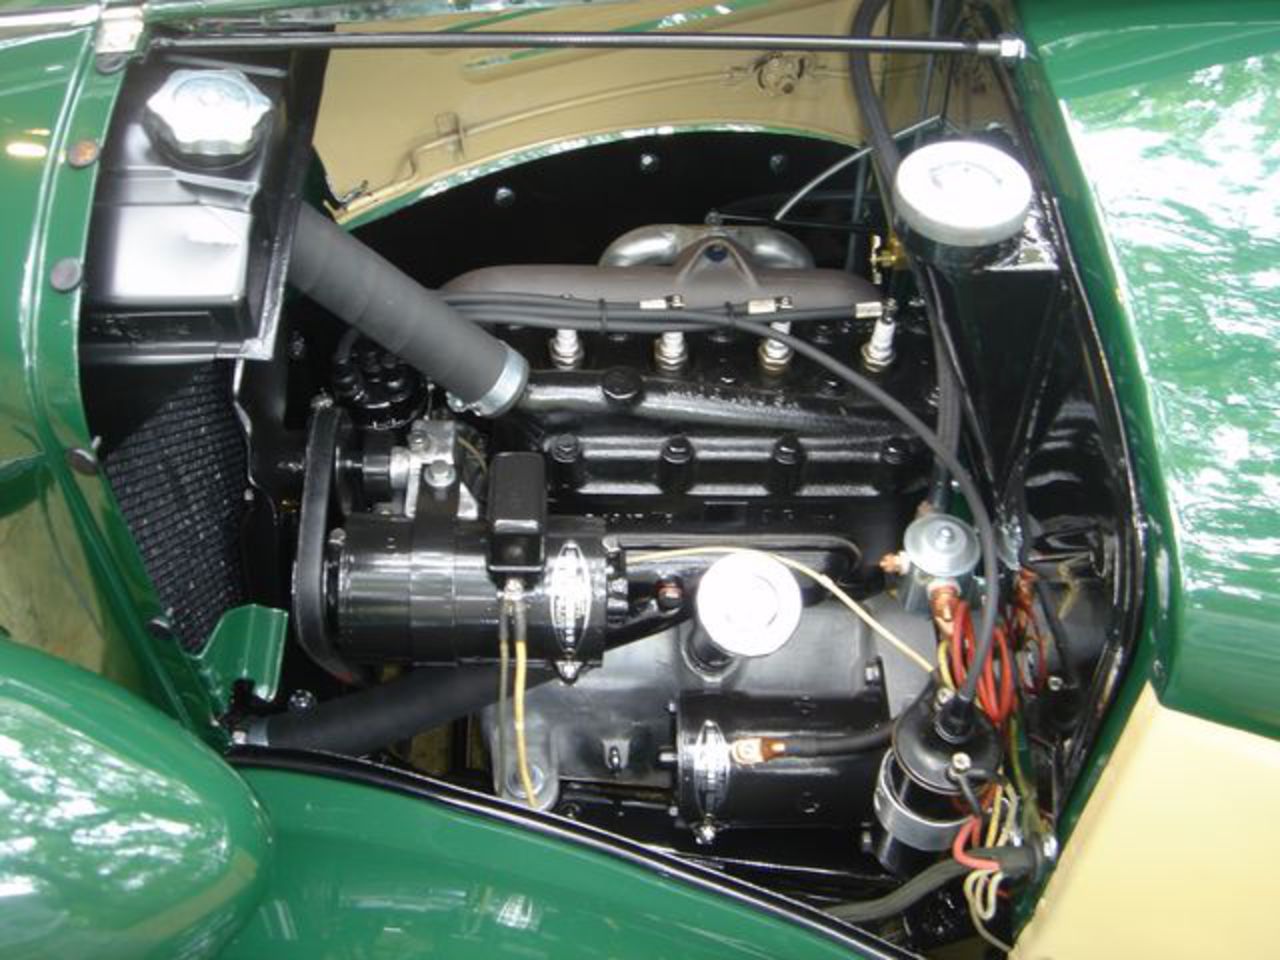 1938 Used BANTAM ROADSTER AUSTIN at Find Great Cars Serving RAMSEY ...